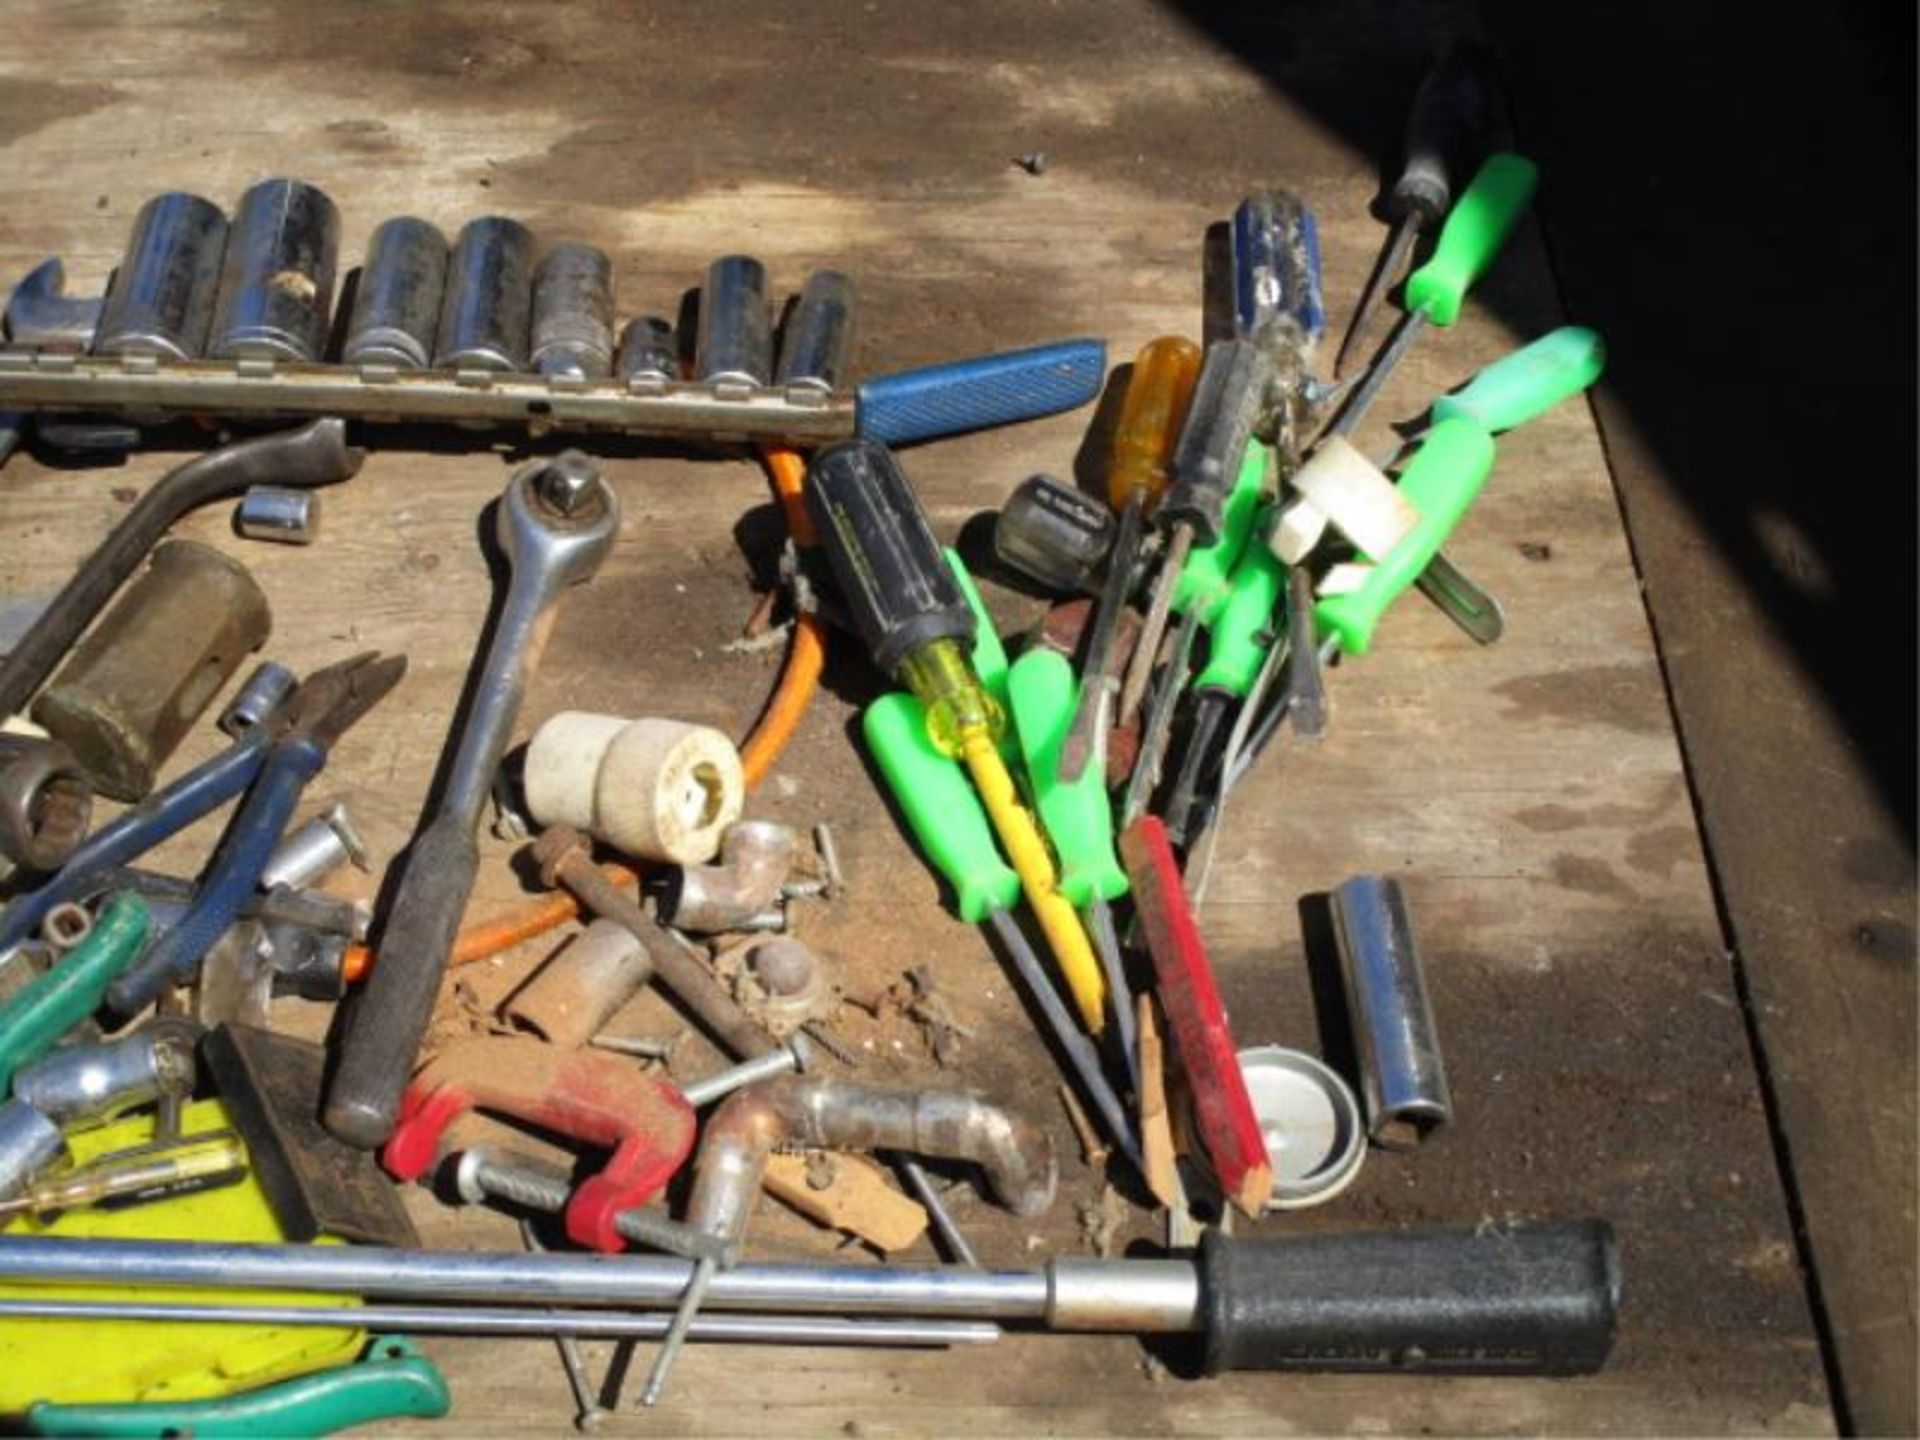 Lot Asst. Hand Tools - Bucket Boss Bag, Asst. Sockets, Screw Drivers, C-Clamps, Wrenches, Lg. - Image 6 of 9